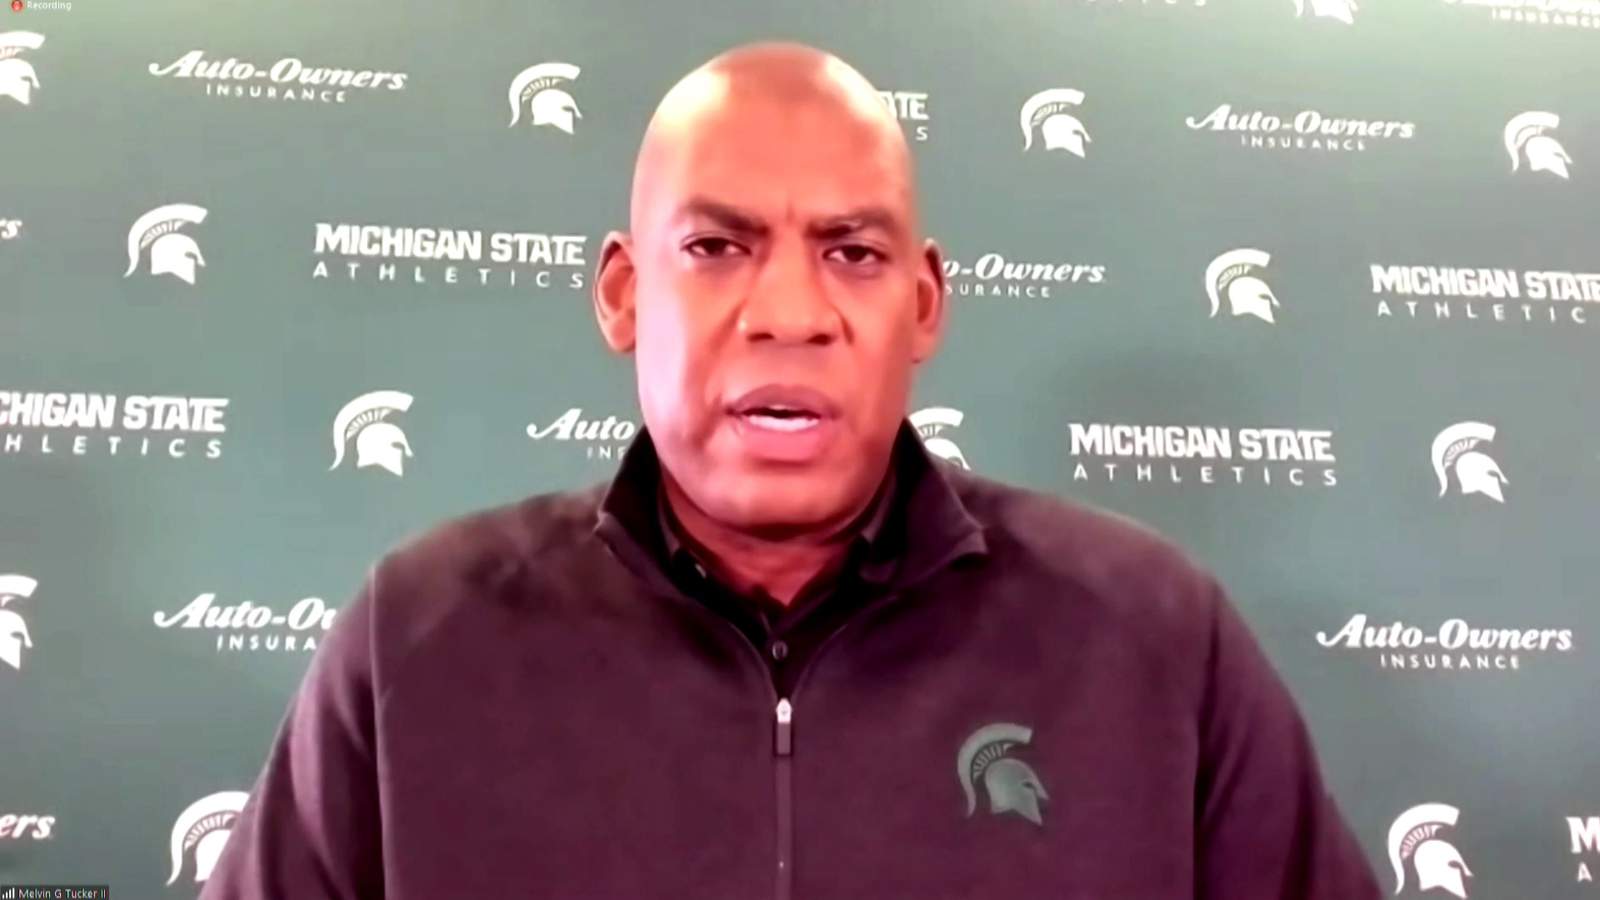 Michigan State coach Mel Tucker calls Michigan ‘school up/down the road’ 4 times ahead of matchup